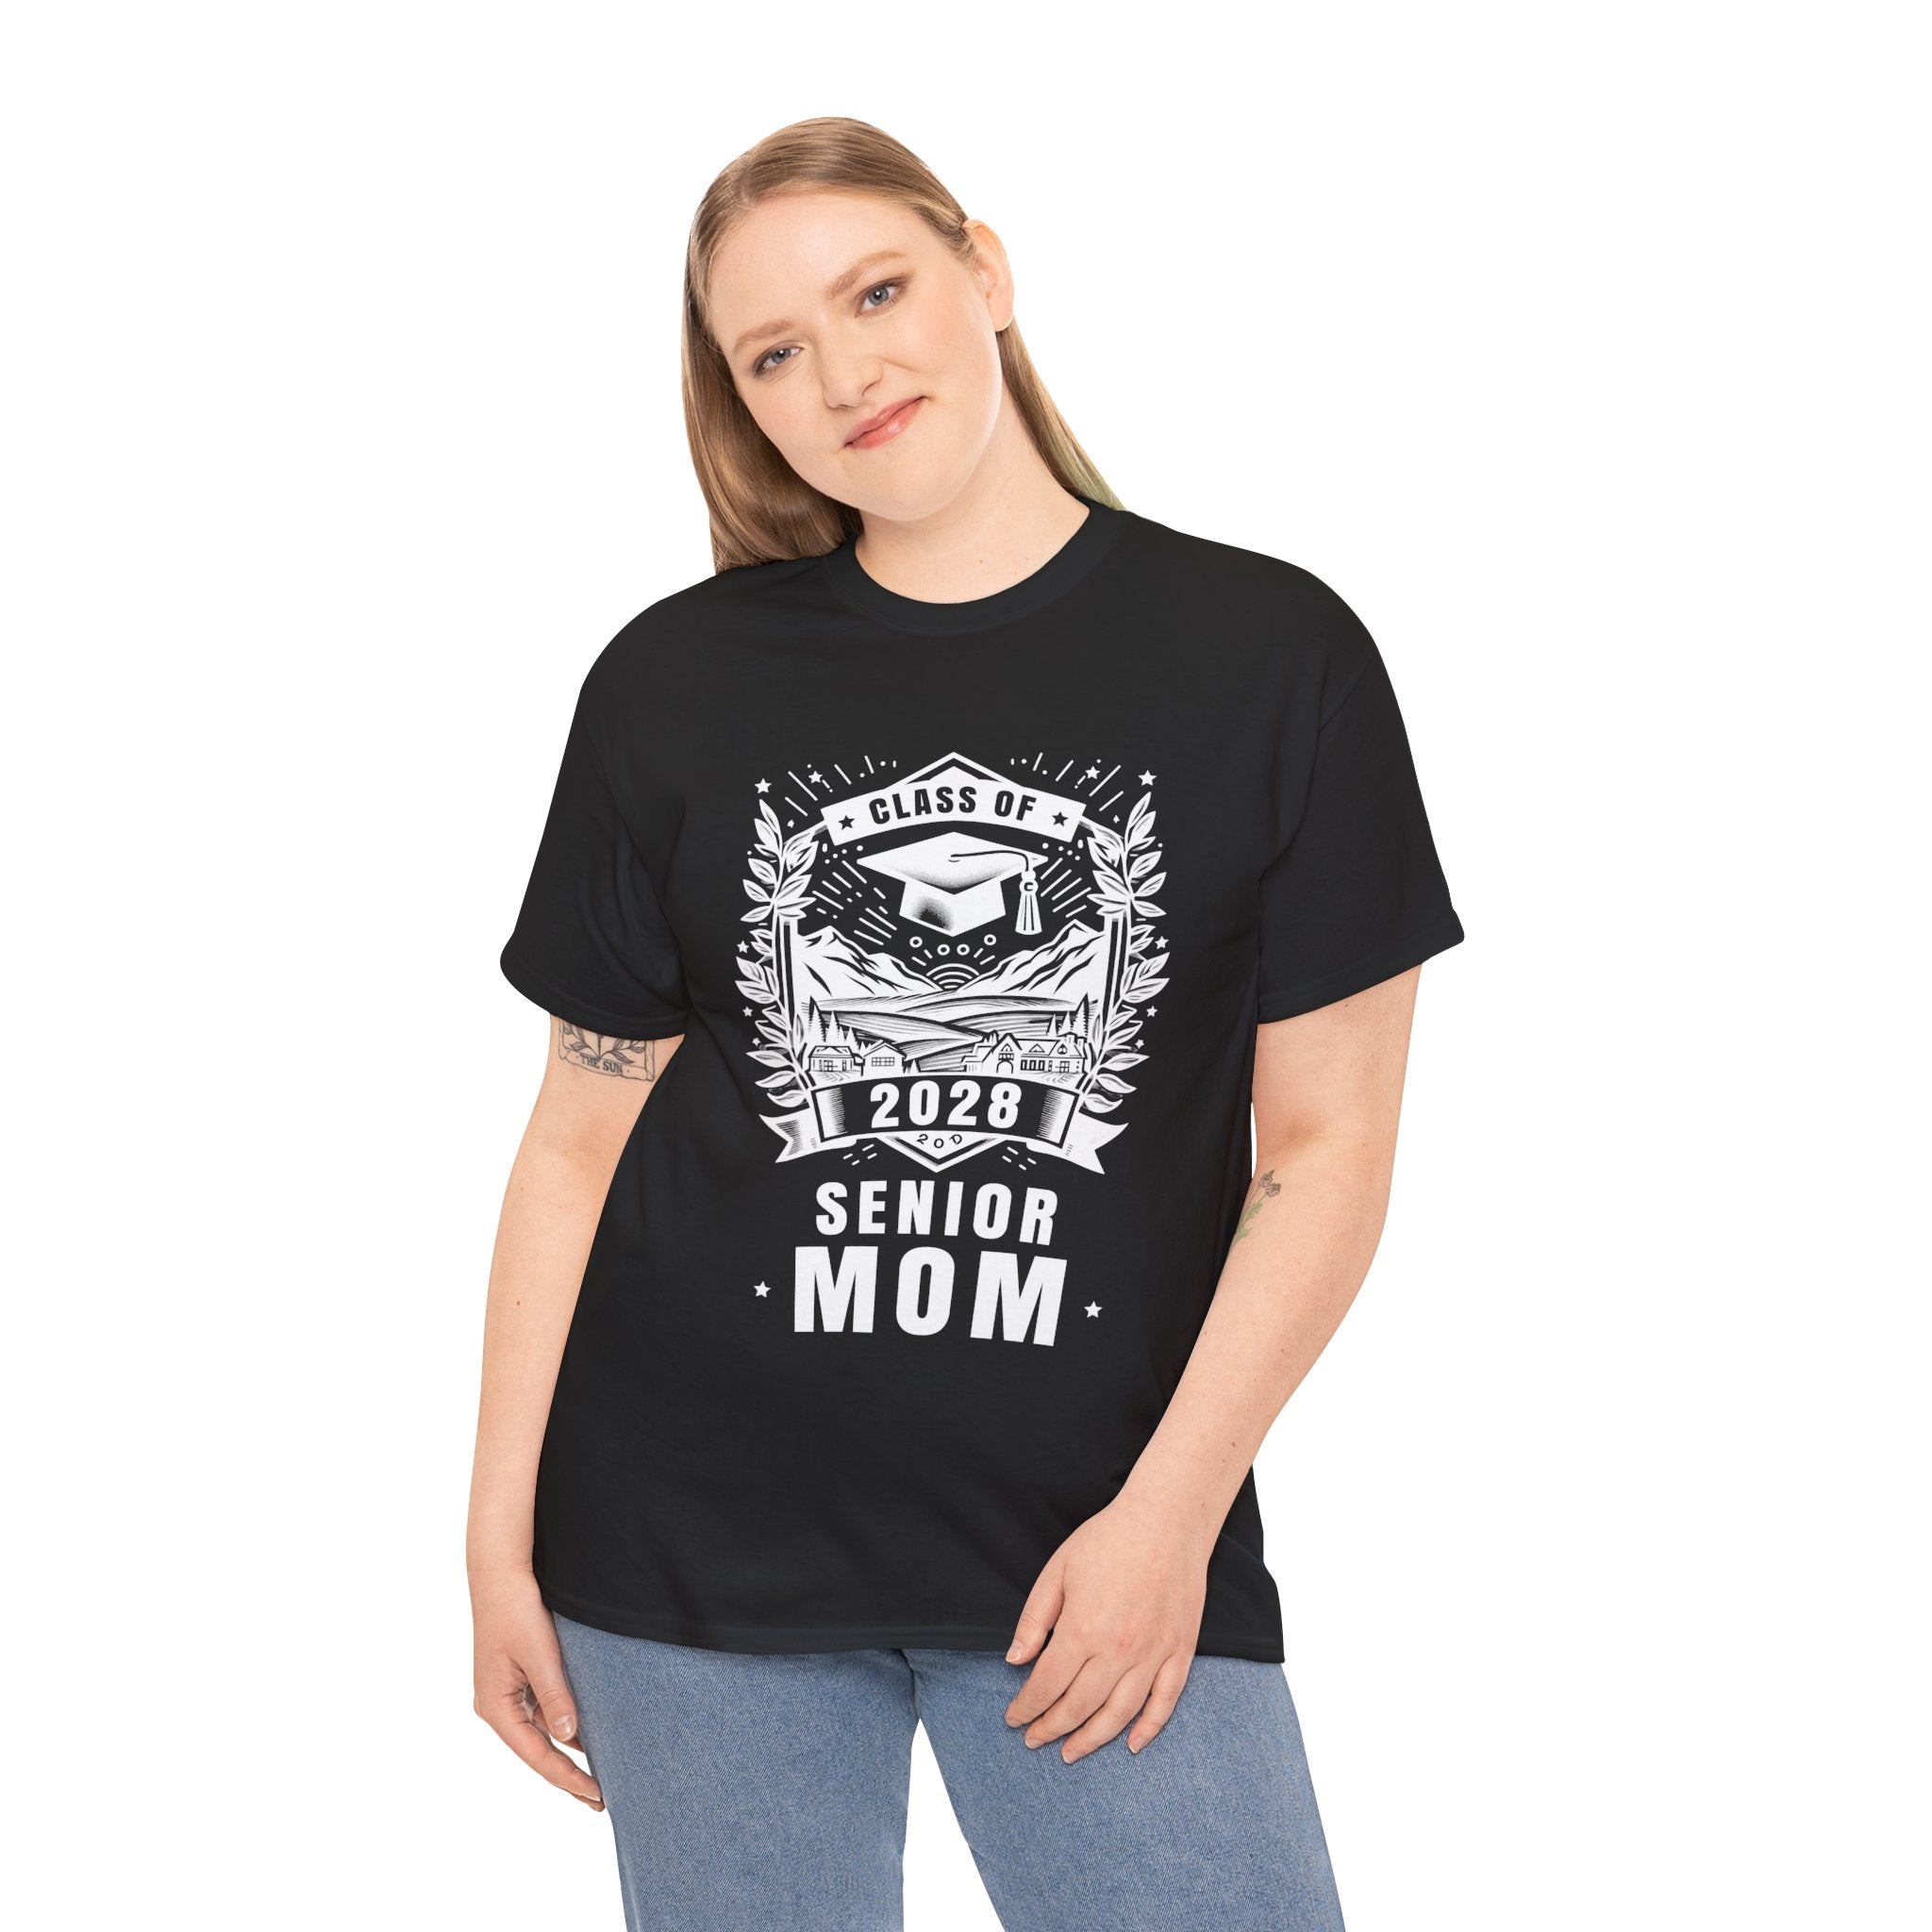 Senior Mom 28 Class of 2028 Back to School Graduation 2028 Plus Size Clothing for Women